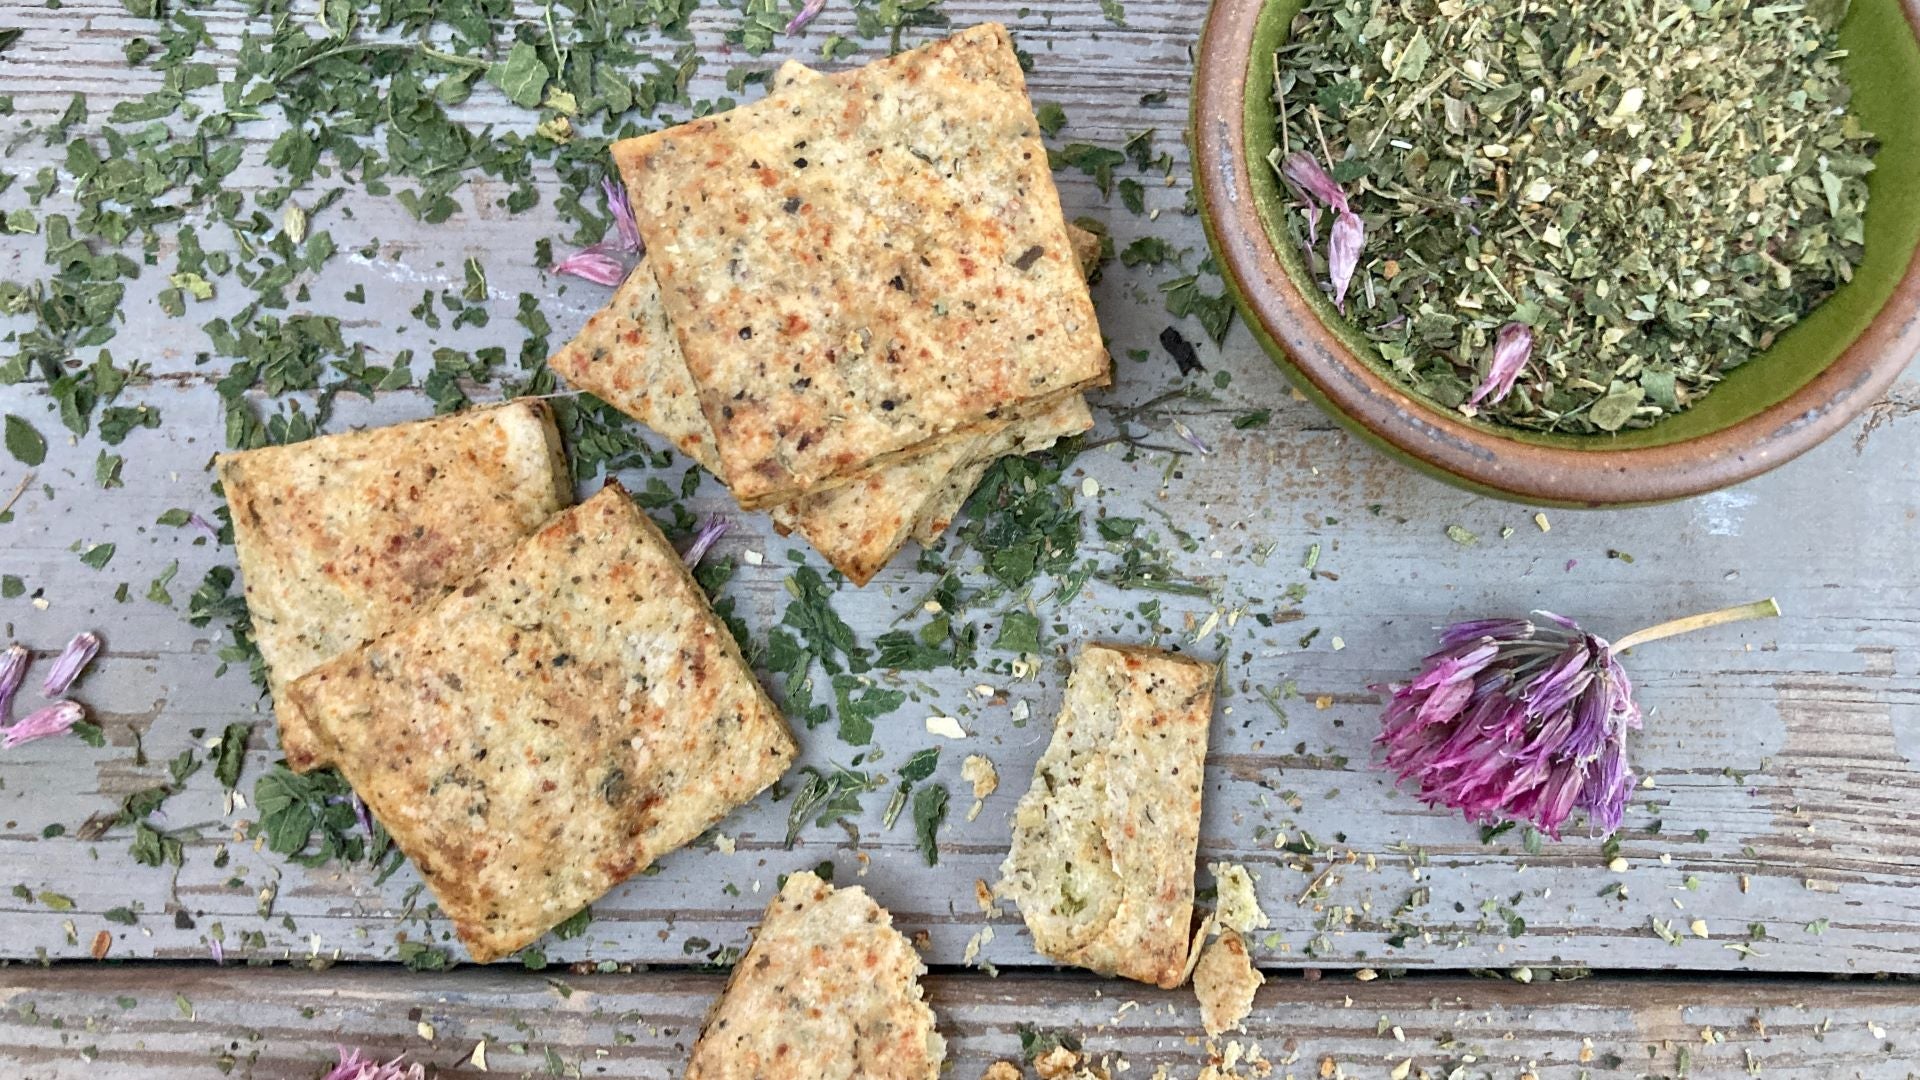 Homemade crackers on a wooden background with seasoning around them and a chive blossom.